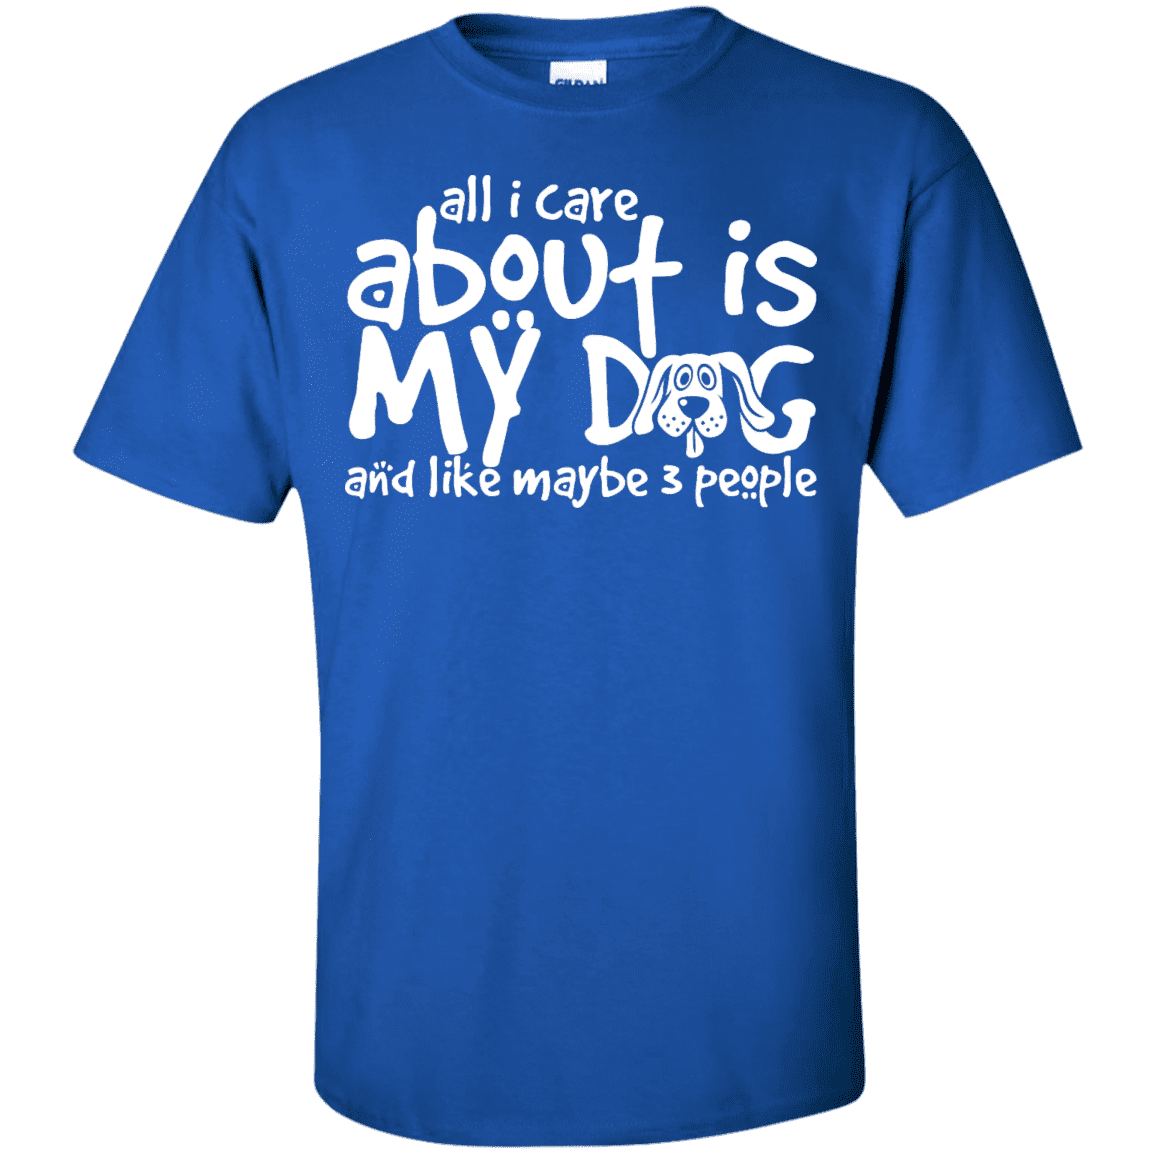 All I Care About Is My Dog - T Shirt.